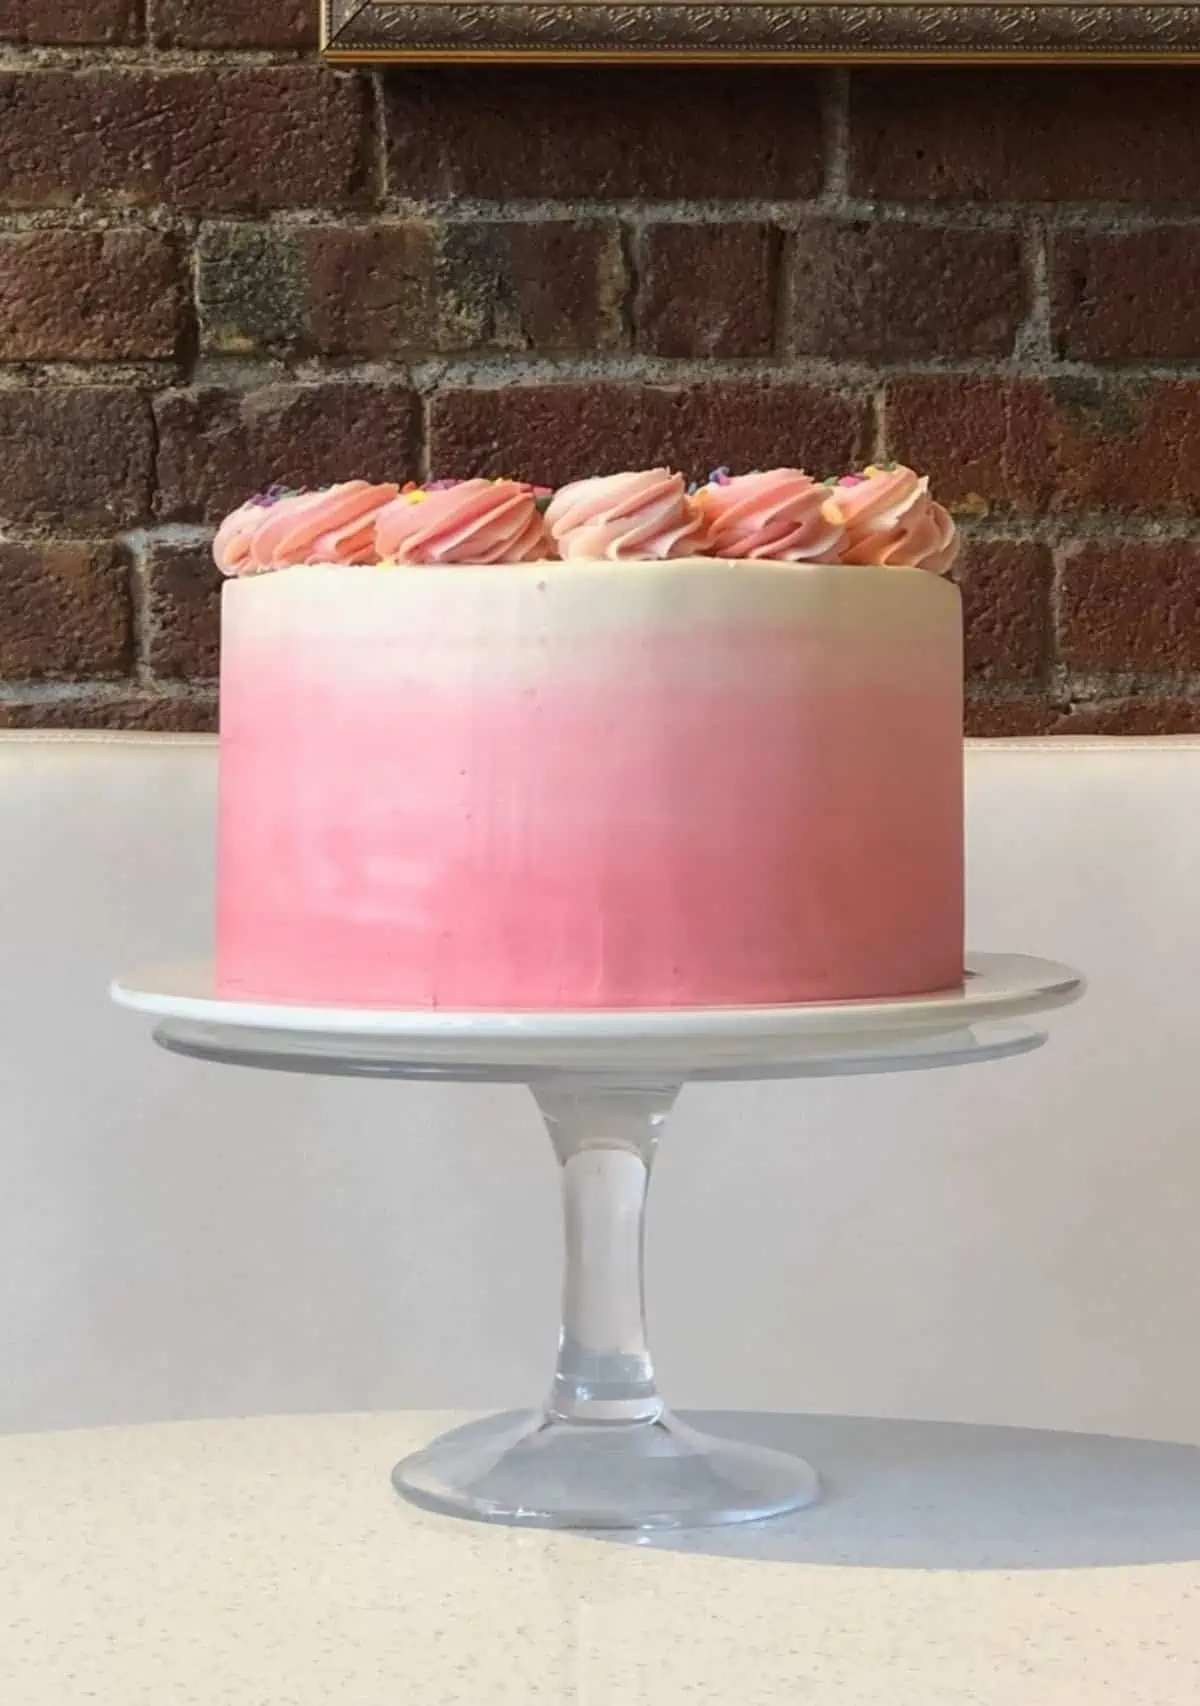 A vegan ombré cake from Petunia's Pies and Pastries in Portland.